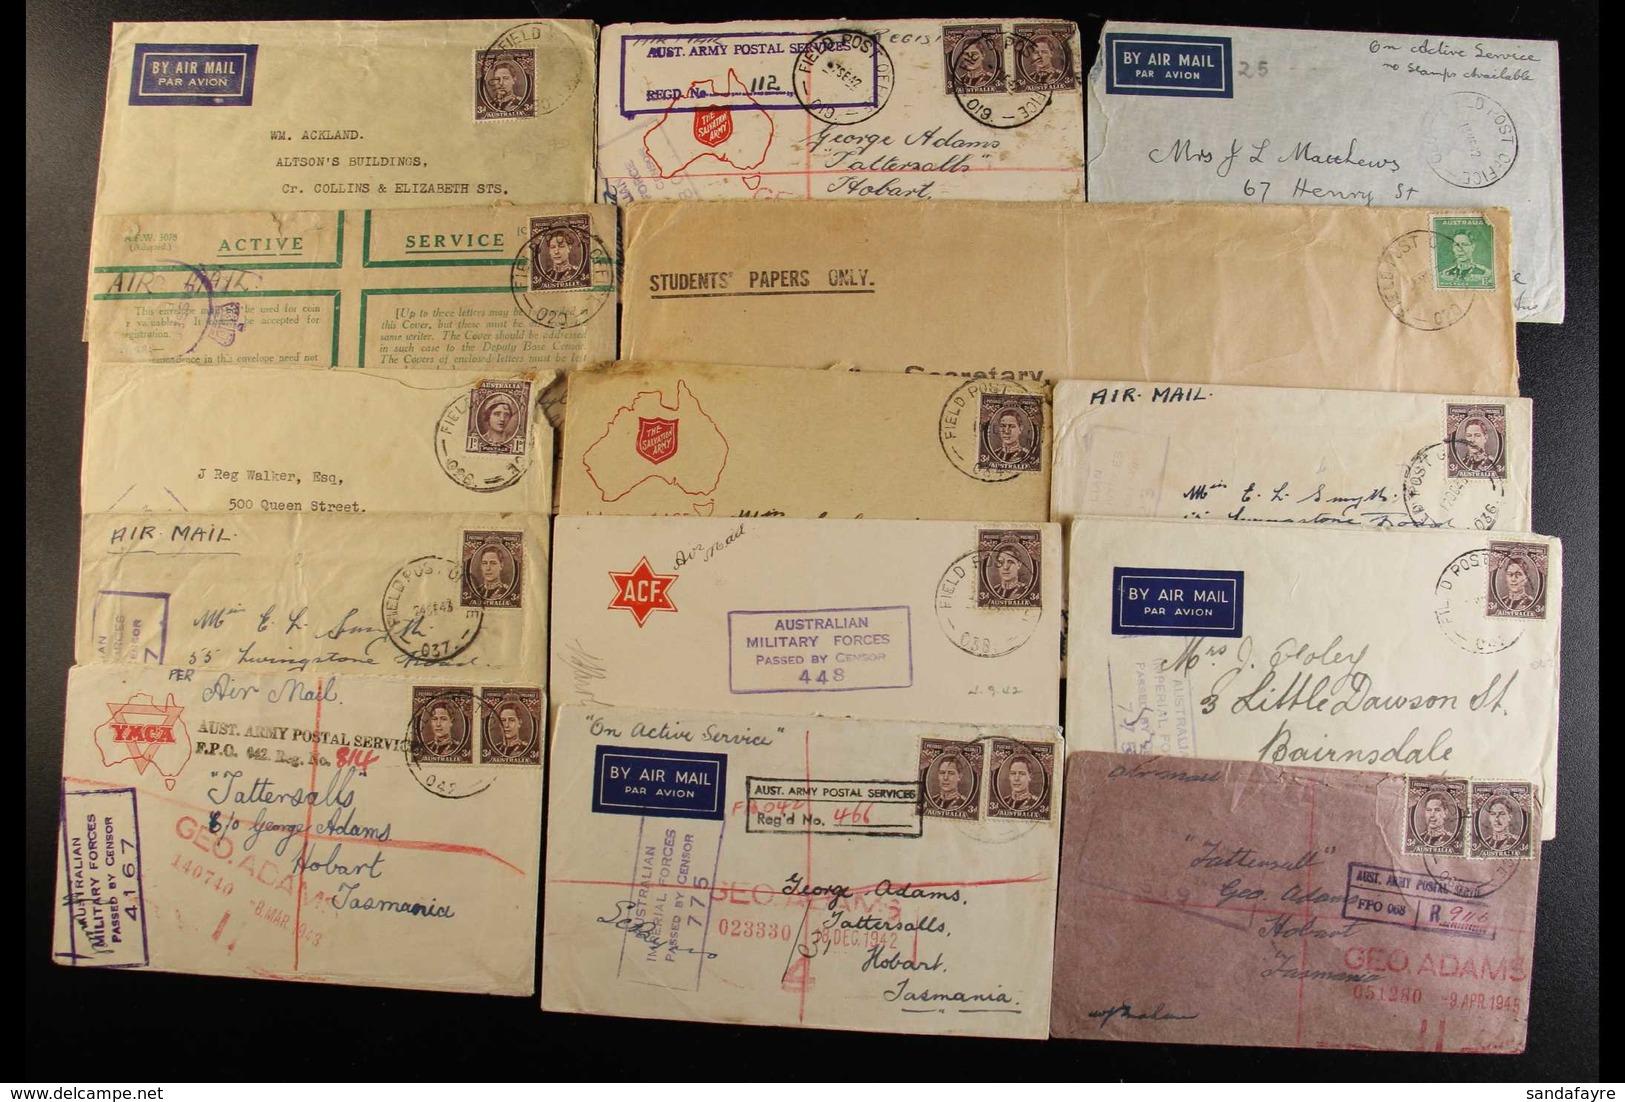 WW2 AUSTRALIAN FORCES - ZERO PREFIXES - FIELD POST OFFICES A Fine Collection Of Covers Back To Australia, Or One To NZ,  - Papoea-Nieuw-Guinea